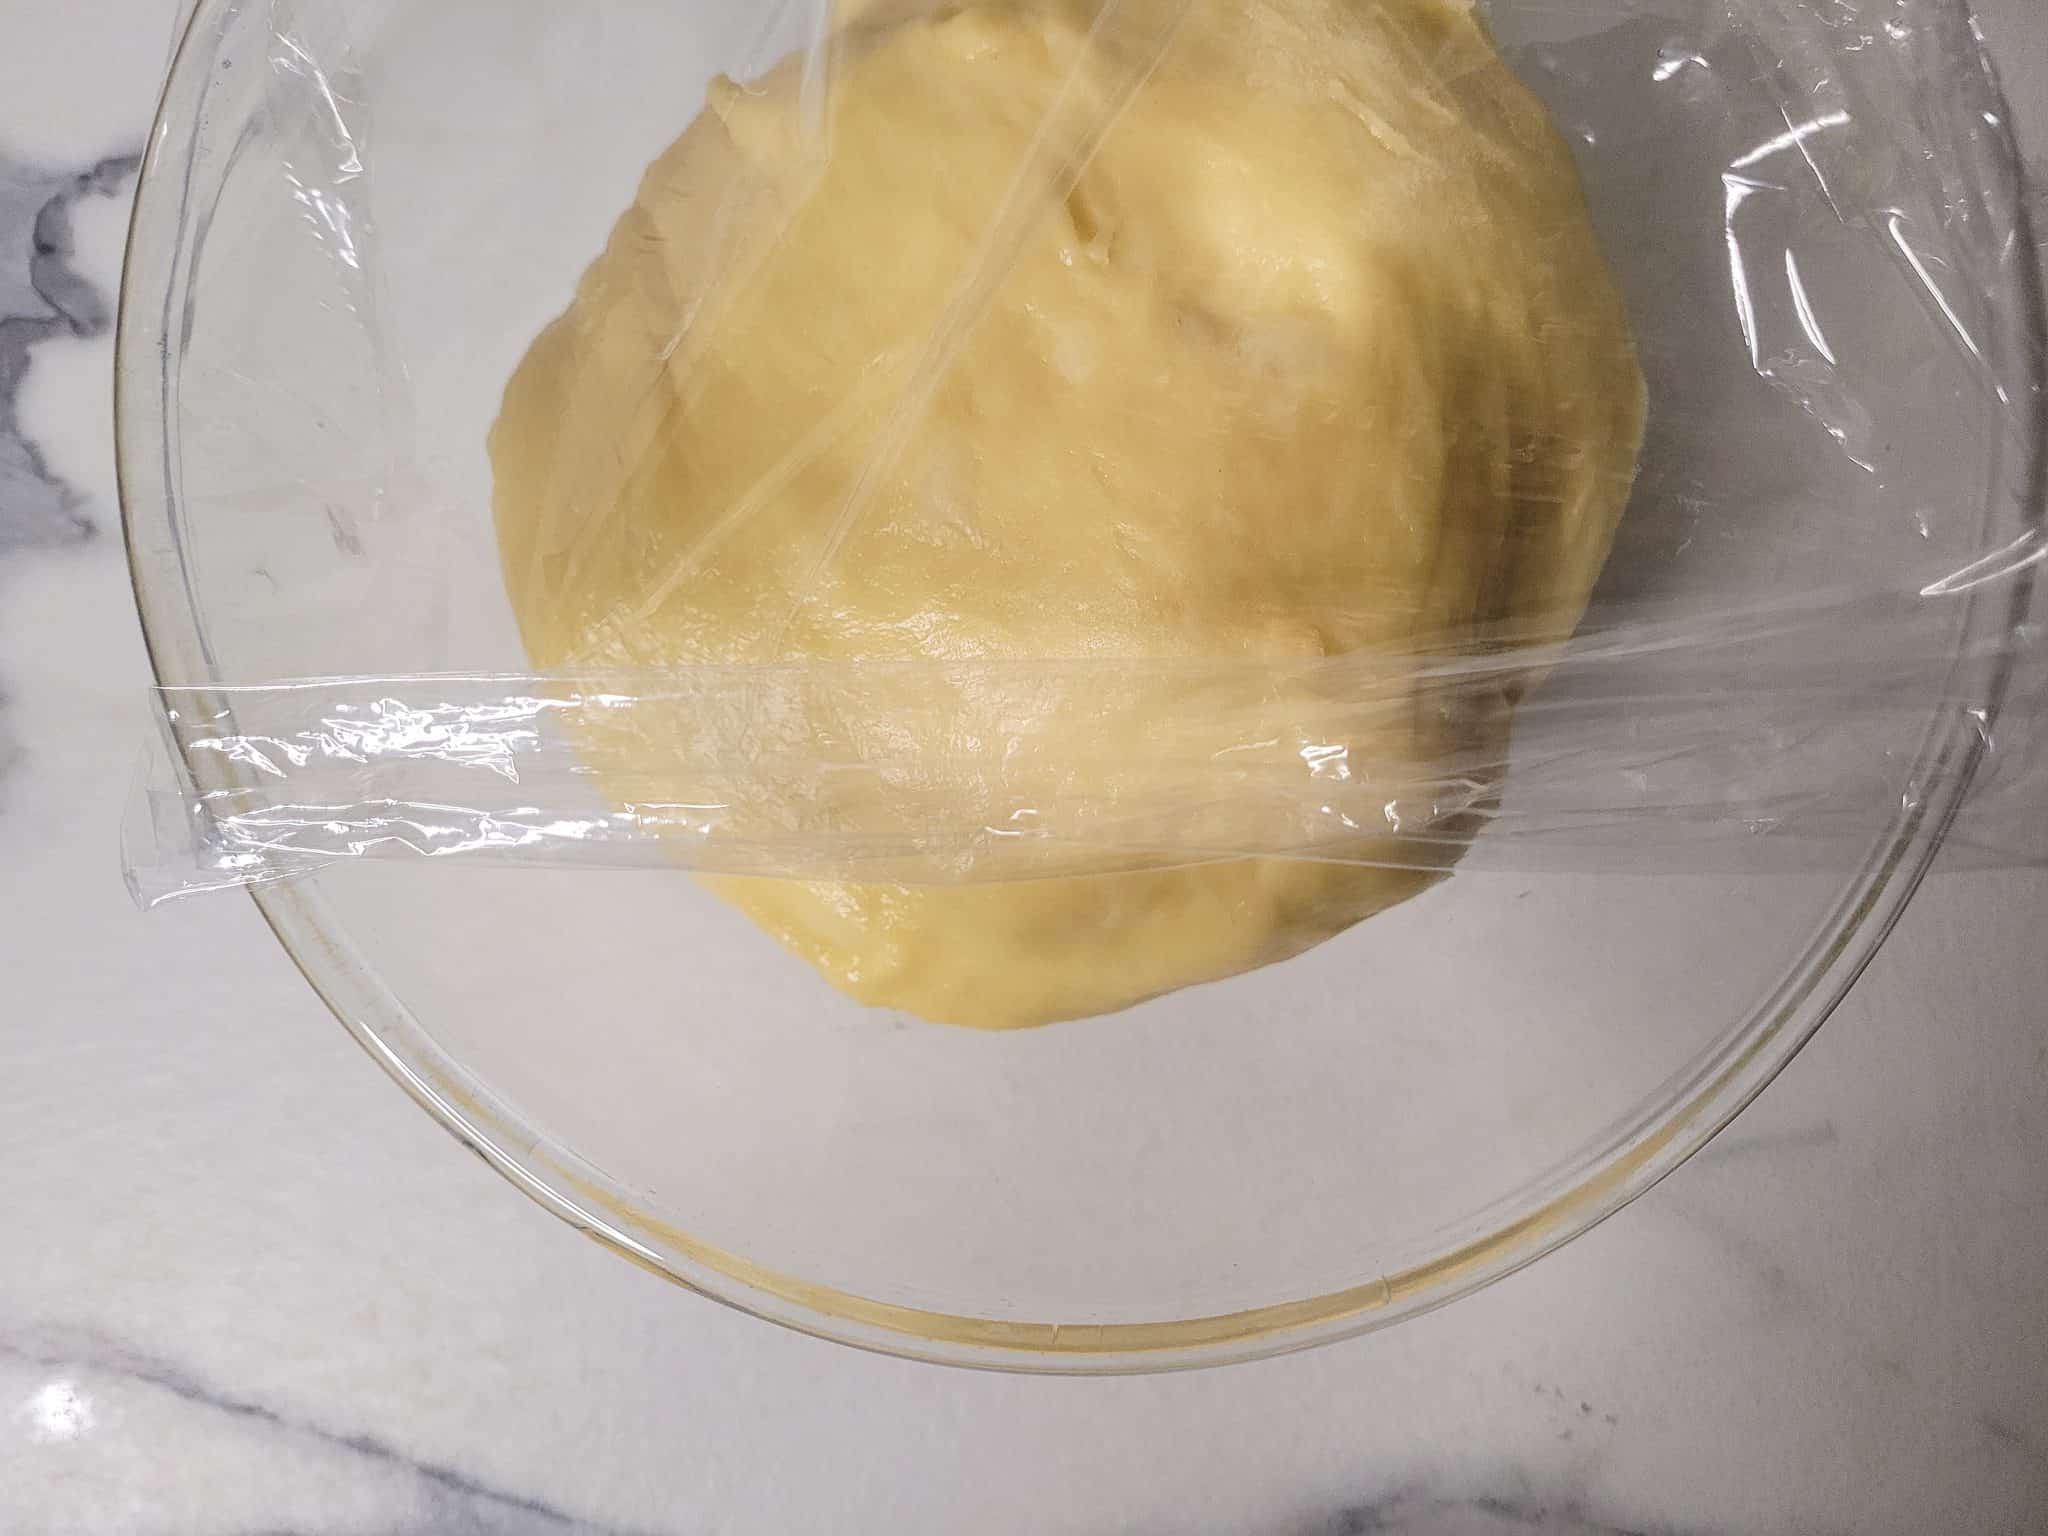 Covered dough for proofing in a glass bowl